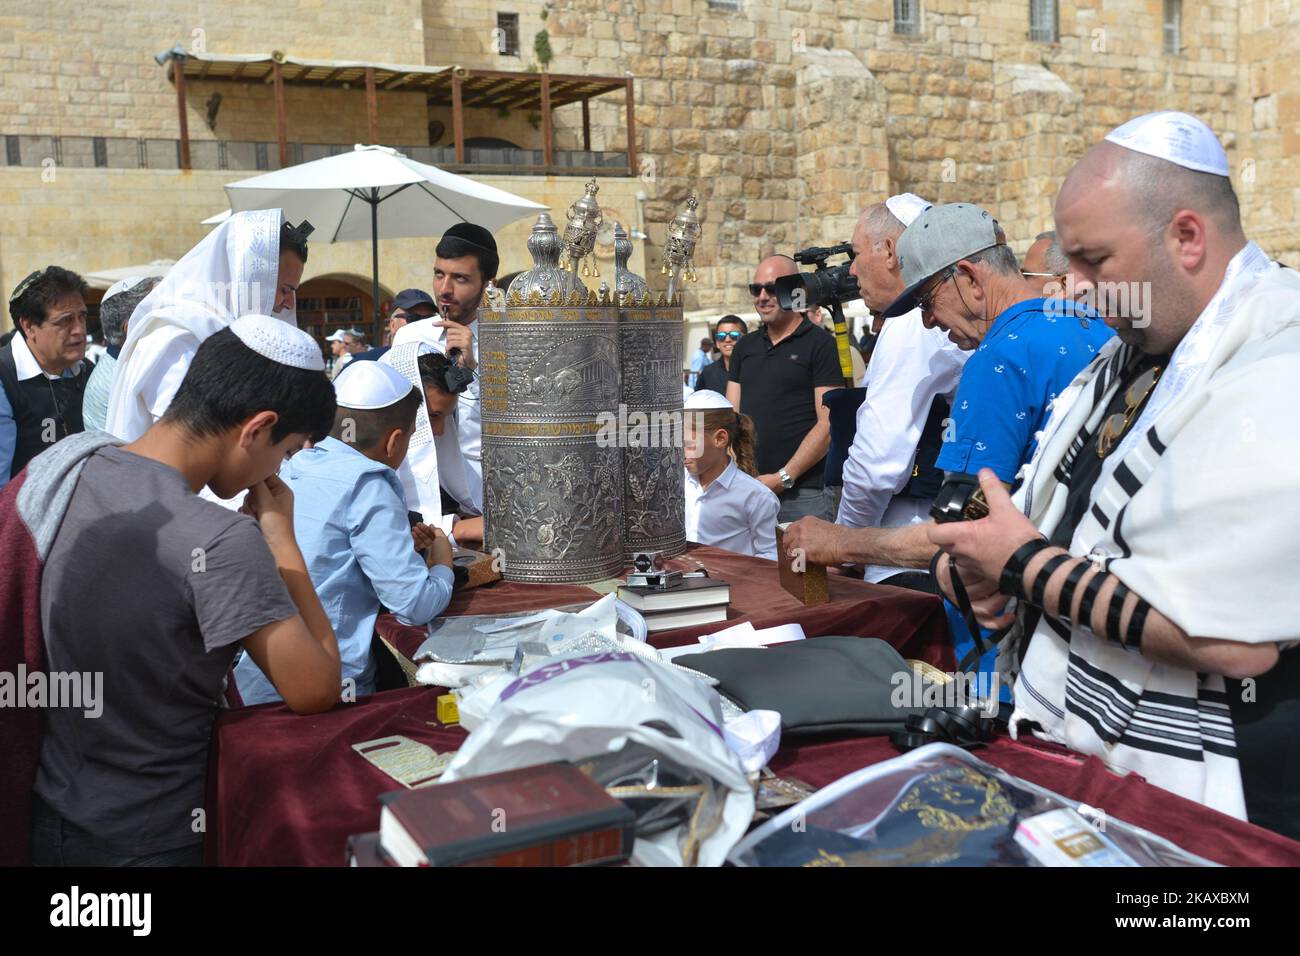 Young boys seen at The Western Wall on their Bar Mitzvah day, a Jewish coming of age ritual for boys, in the Old City in Jerusalem. Wednesday, 14 March 2018, in Jerusalem, Israel. (Photo by Artur Widak/NurPhoto)  Stock Photo